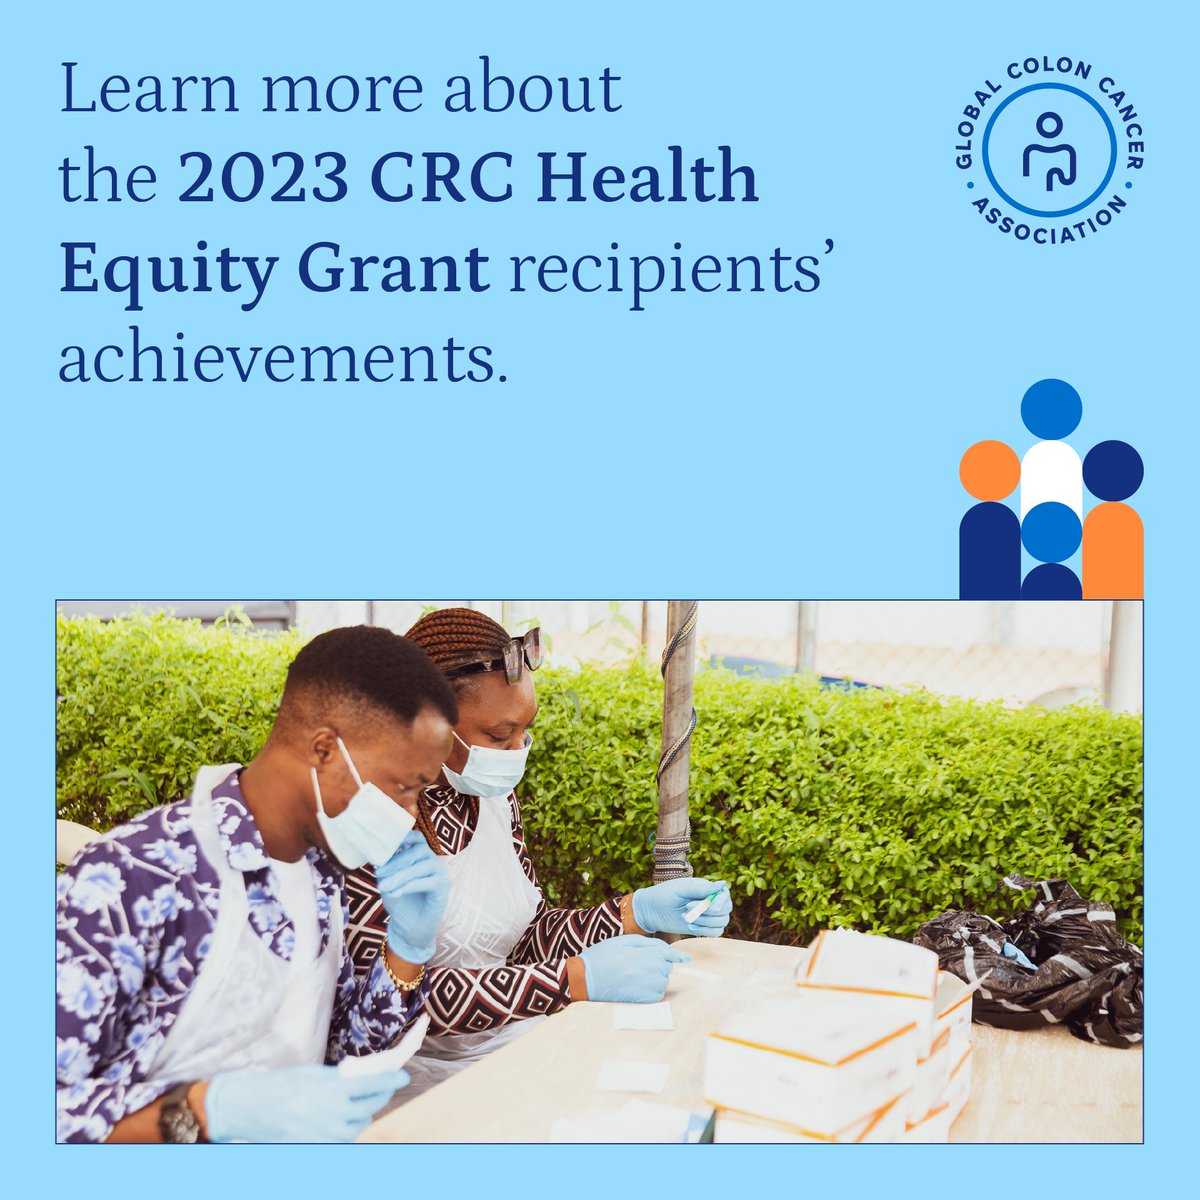 What can you do with a CRC Health Equity Grant? Learn more about what past recipients have accomplished and apply for your own grant today. gcca.info/_HEG_24_Open_ #crchealthequitygrants #colorectalcancer